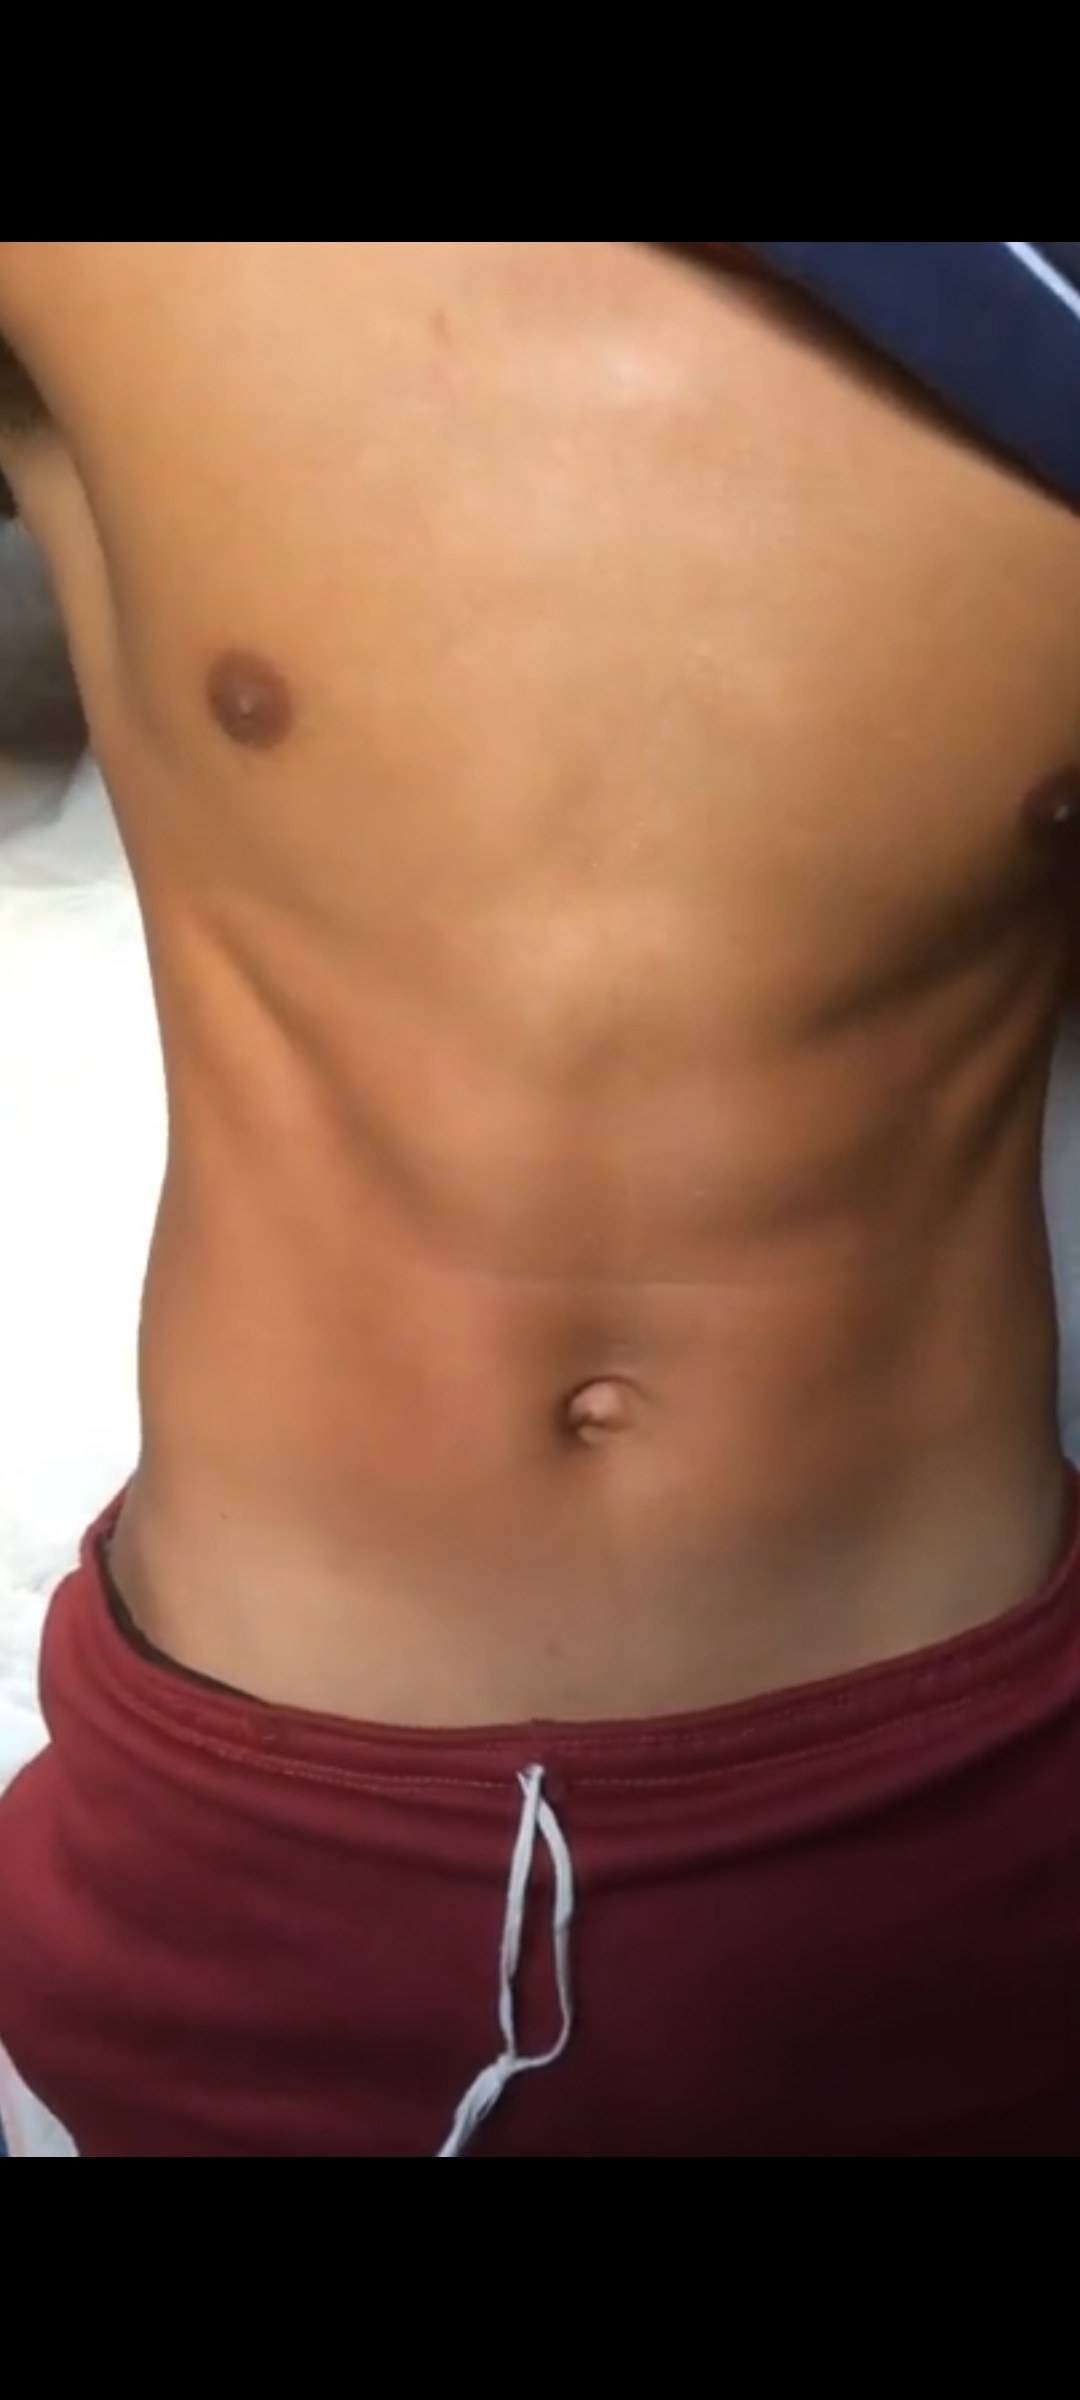 Pokeng Vedio Boys Come - SHIRTLESS BOY OUTIE BELLY BUTTON PLAY - ThisVid.com